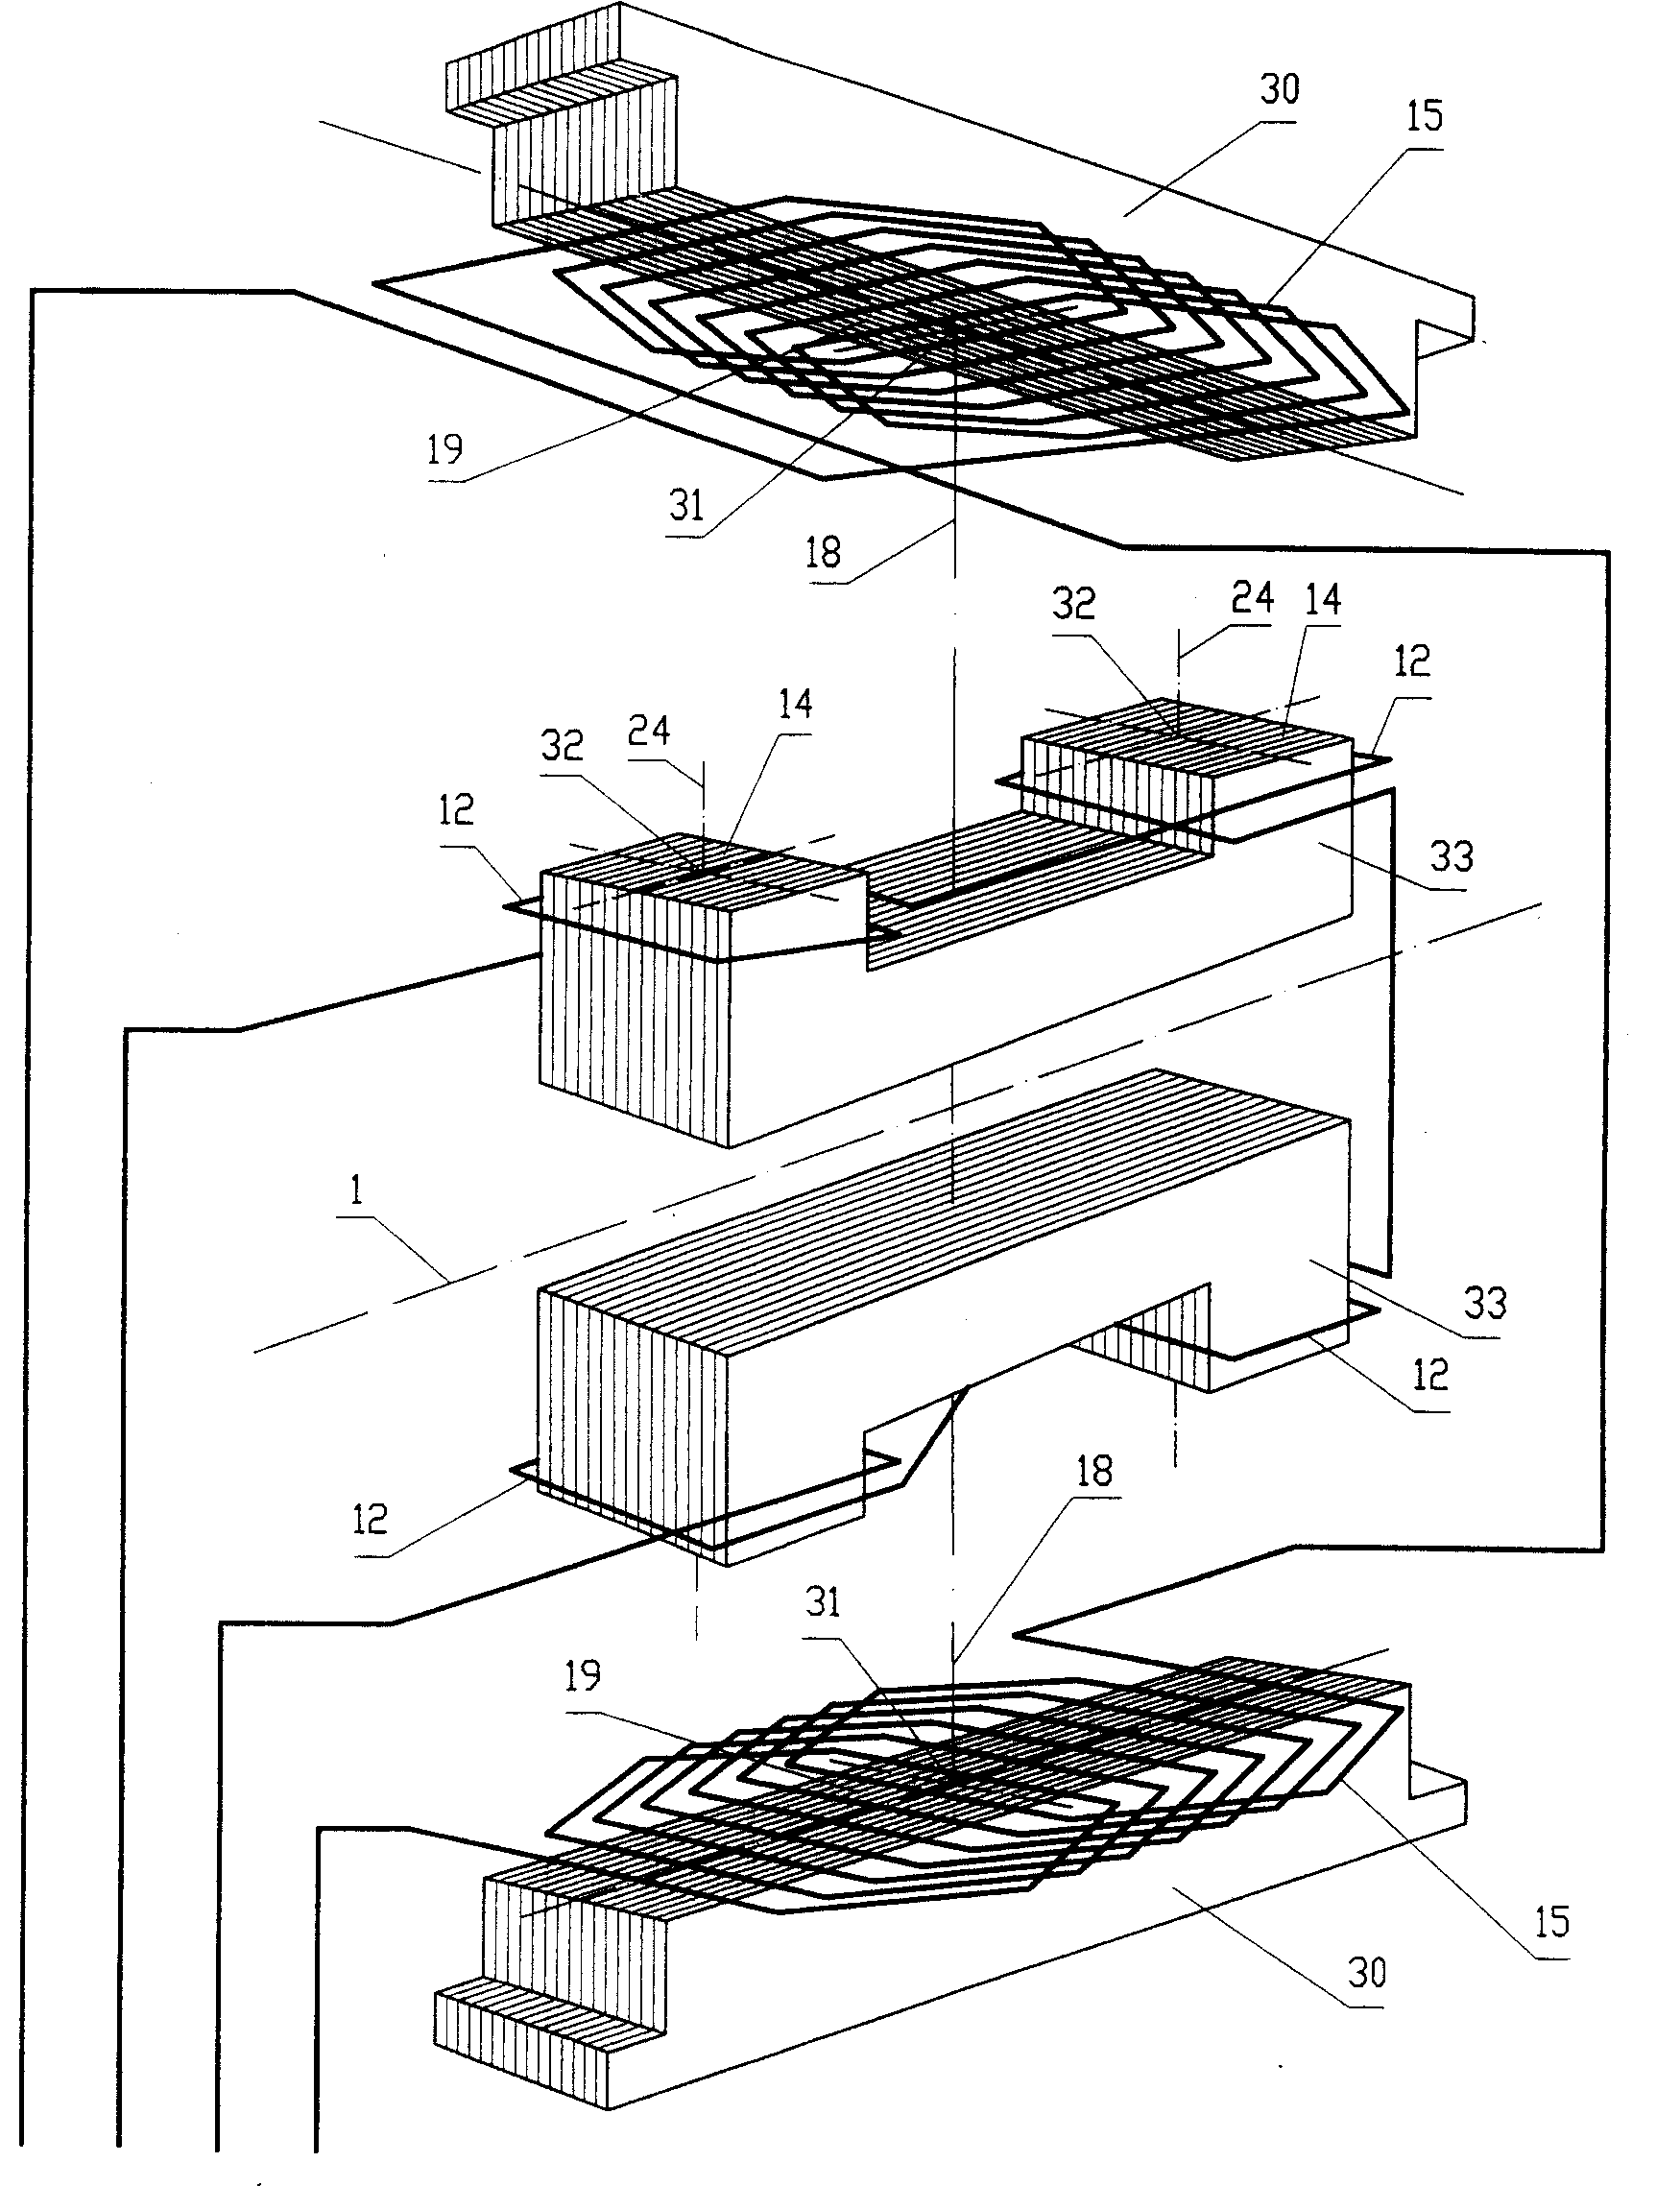 An electric harmonic reciprocating line motion impact device